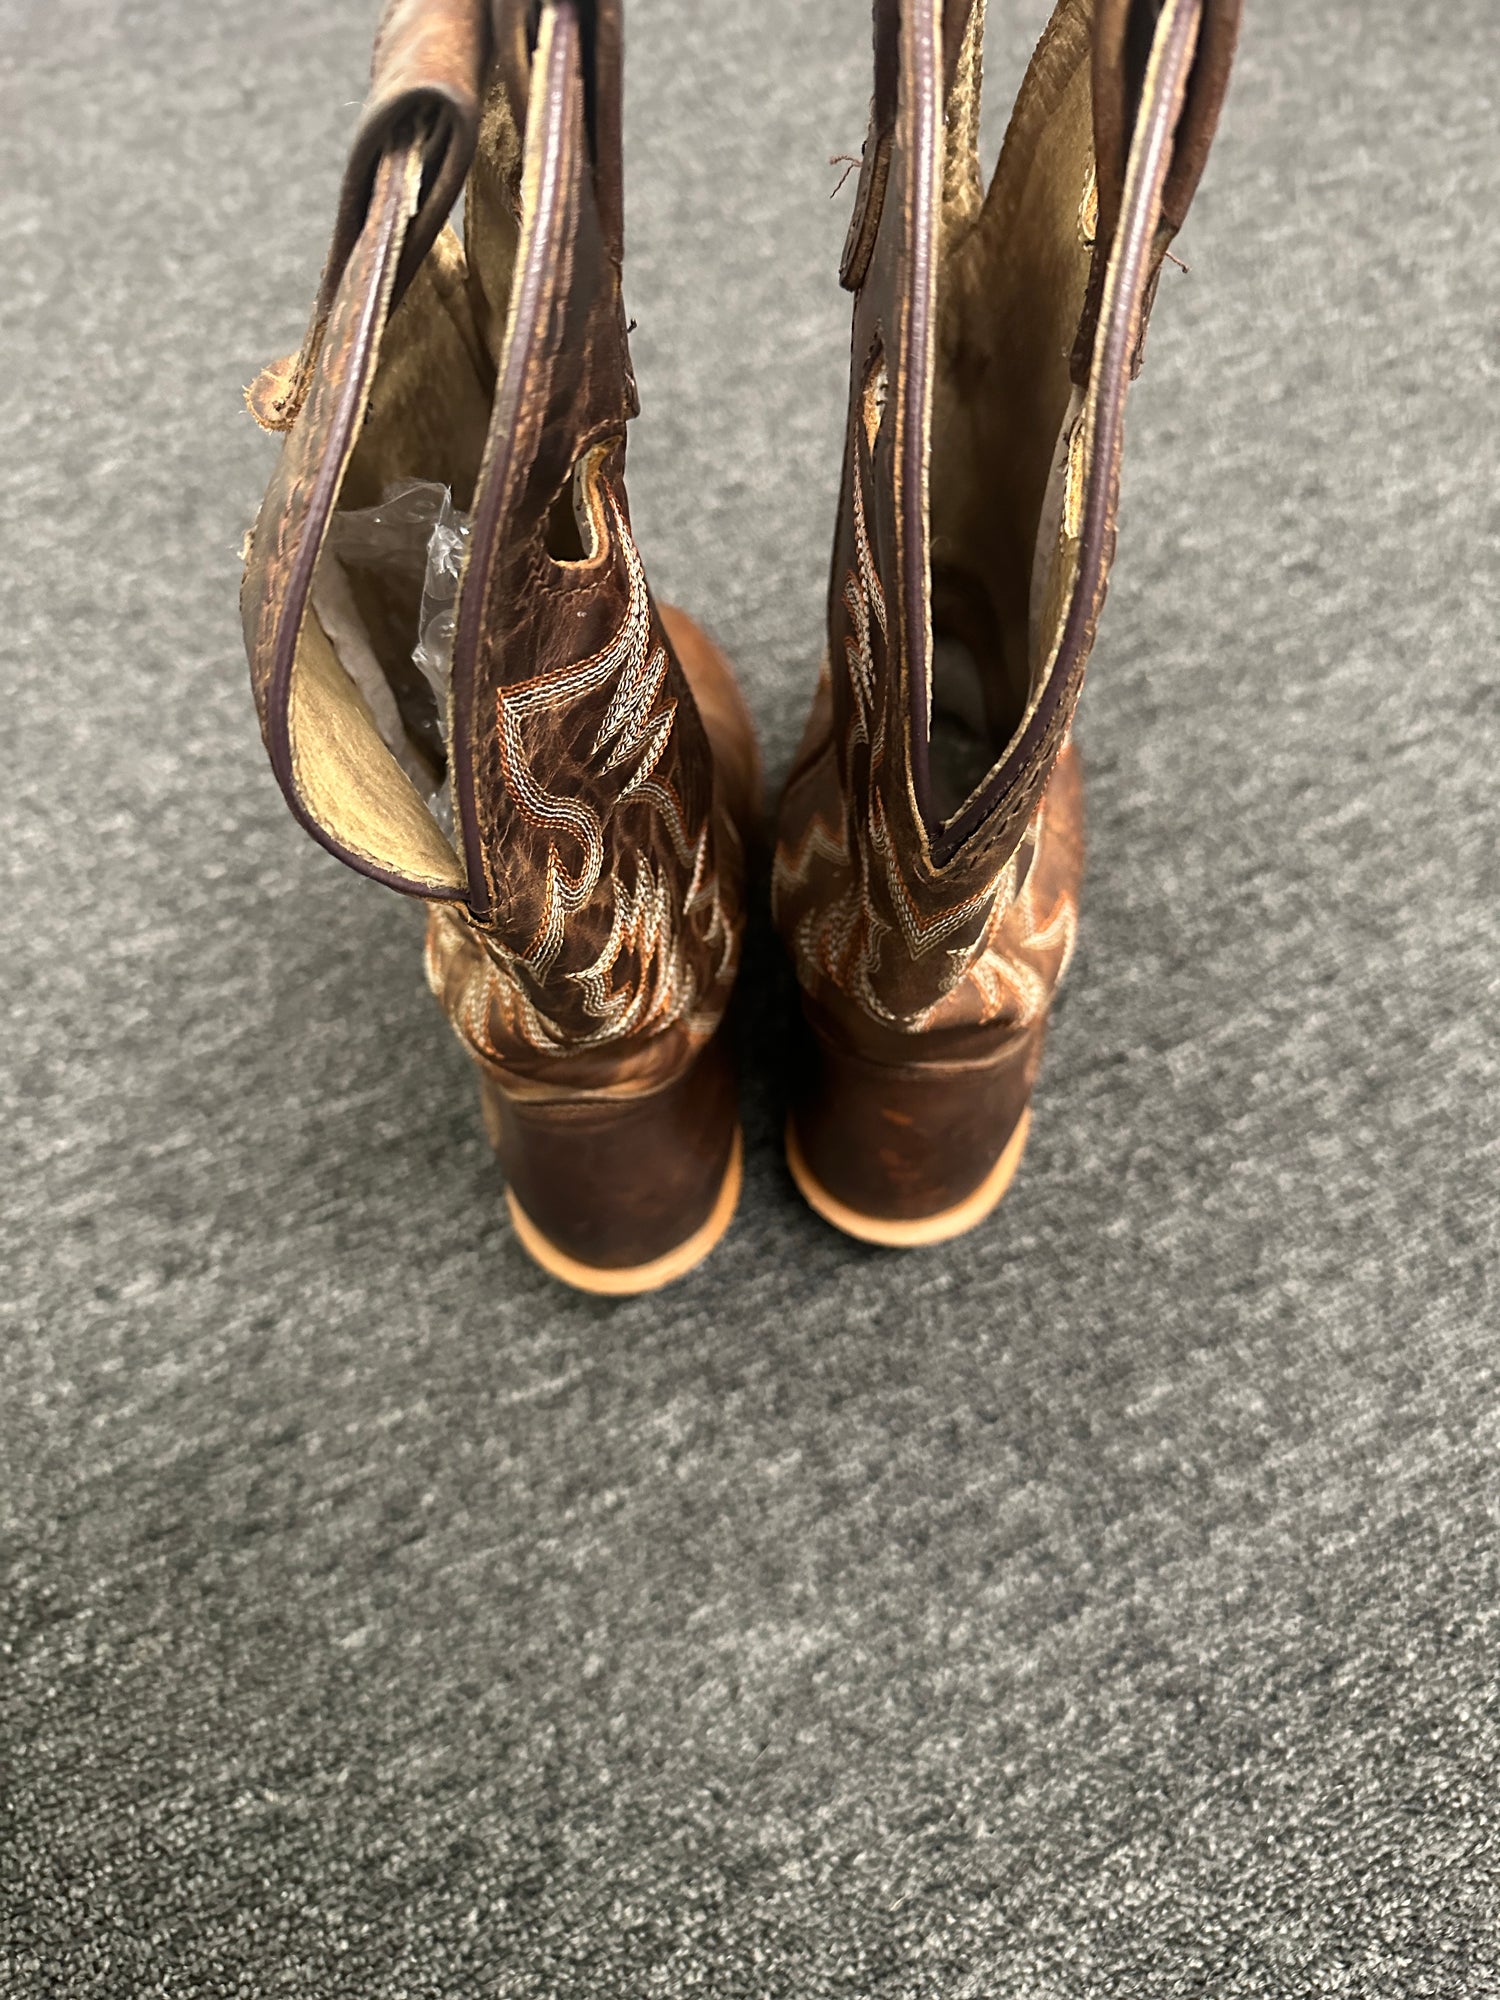 Women's Western Boots - Double - H - Size 8 Med.